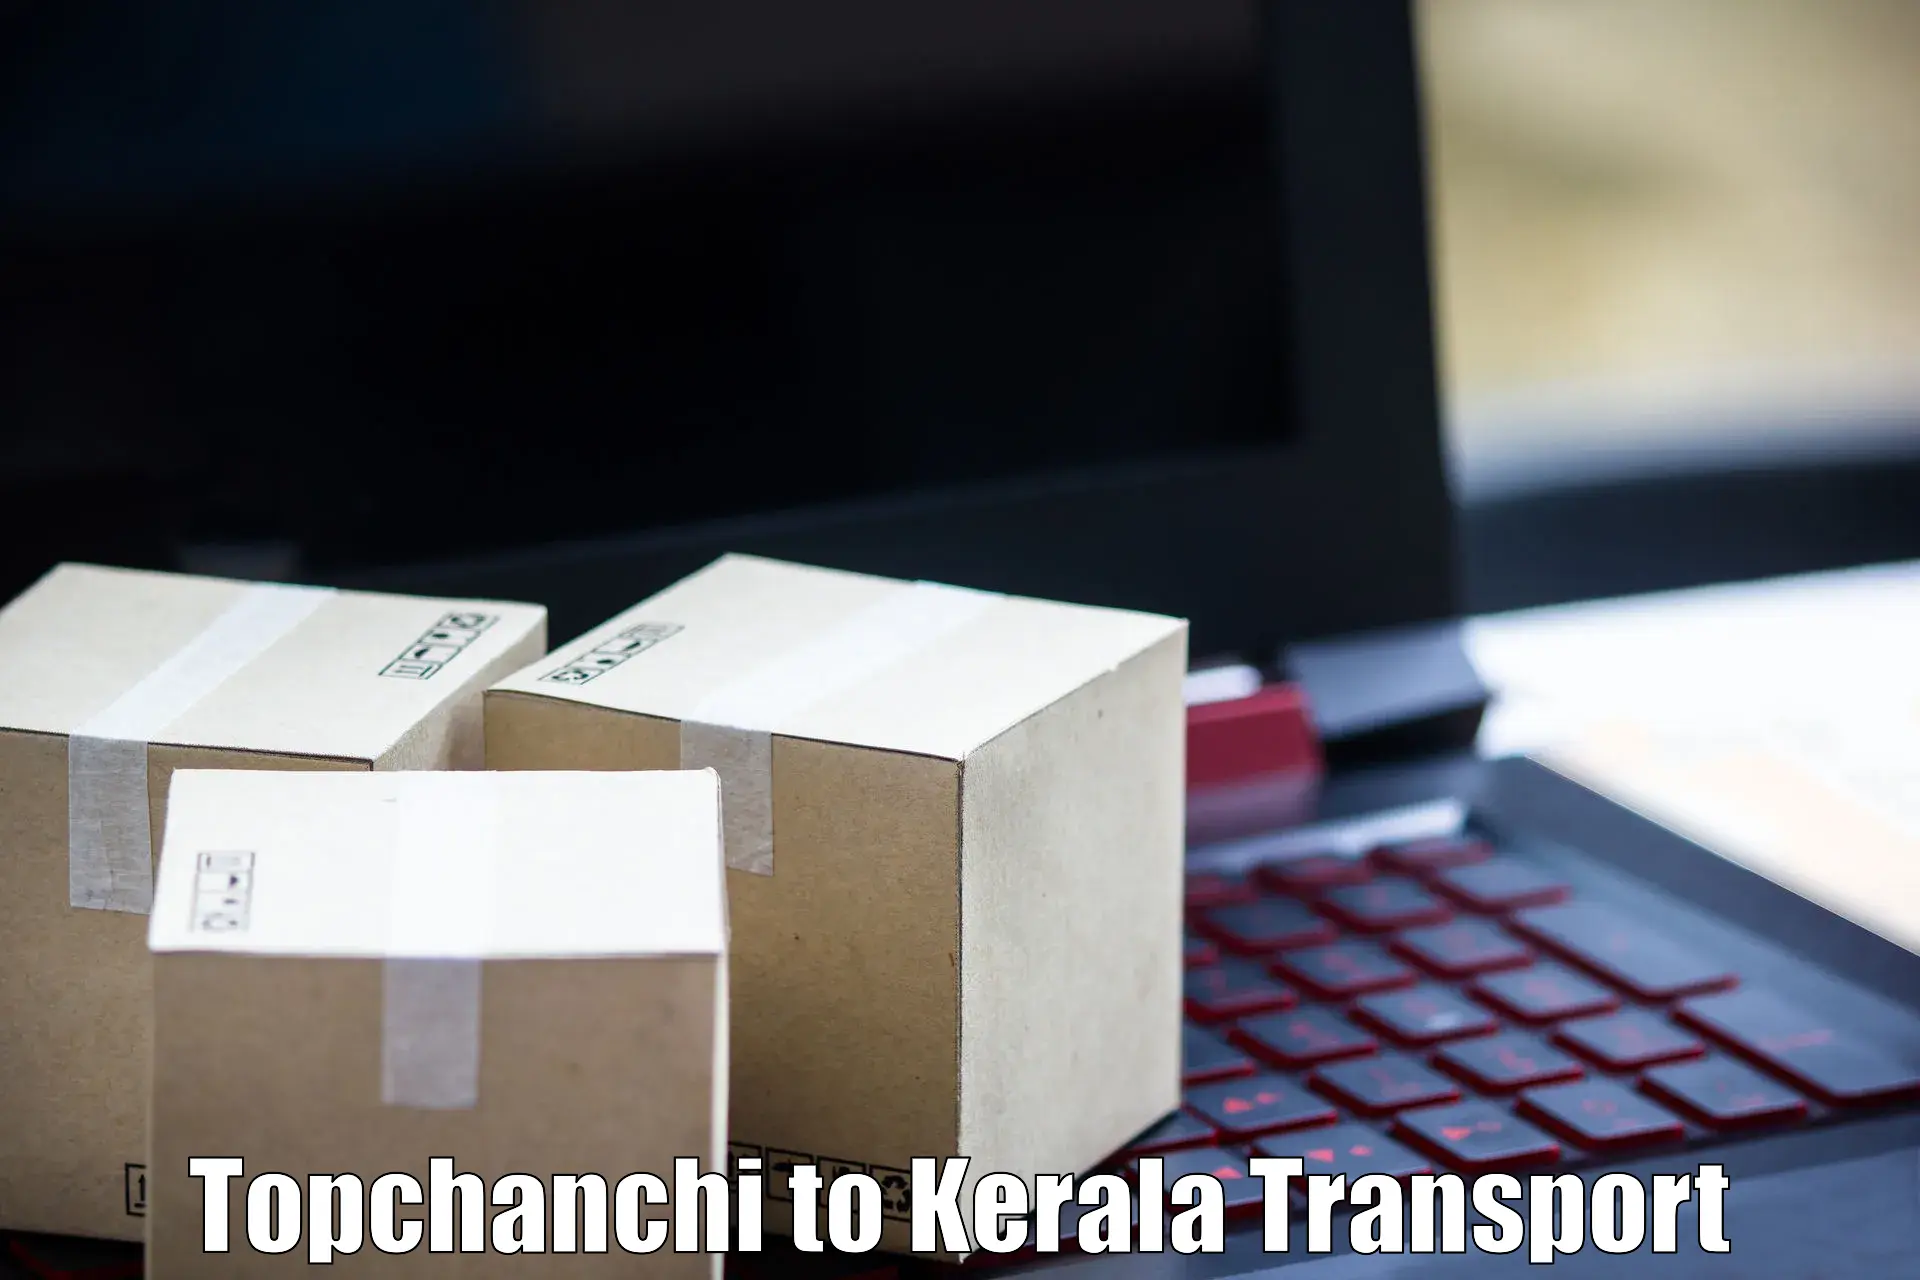 Nationwide transport services Topchanchi to Cochin